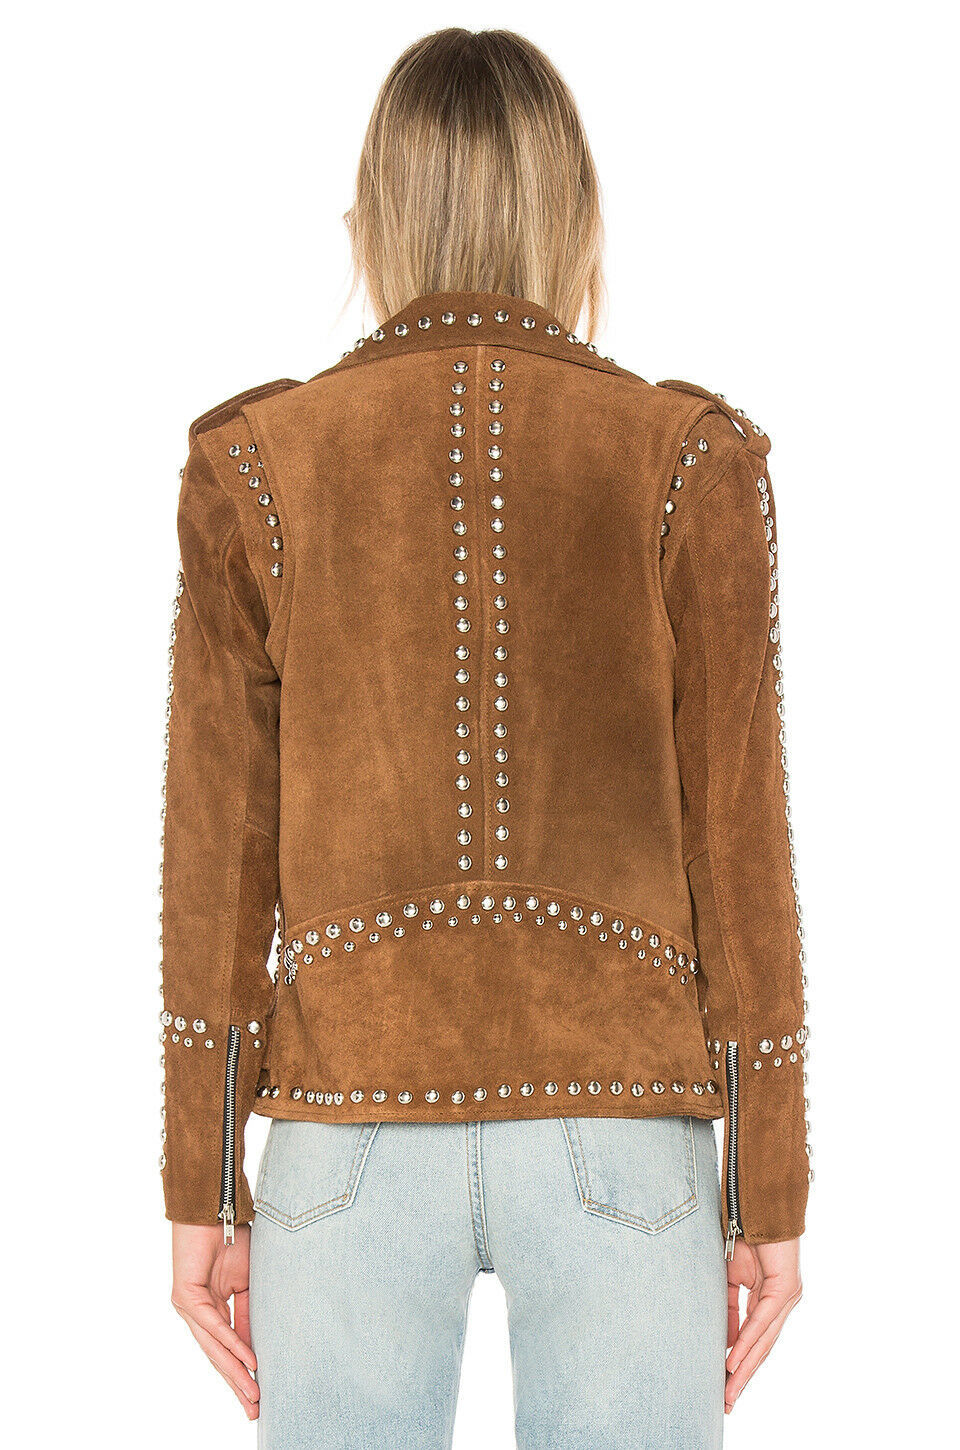 Women&#39;s Brown Color Genuine Suede Leather Silver Studded Belted Straps Jacket - Coats & Jackets